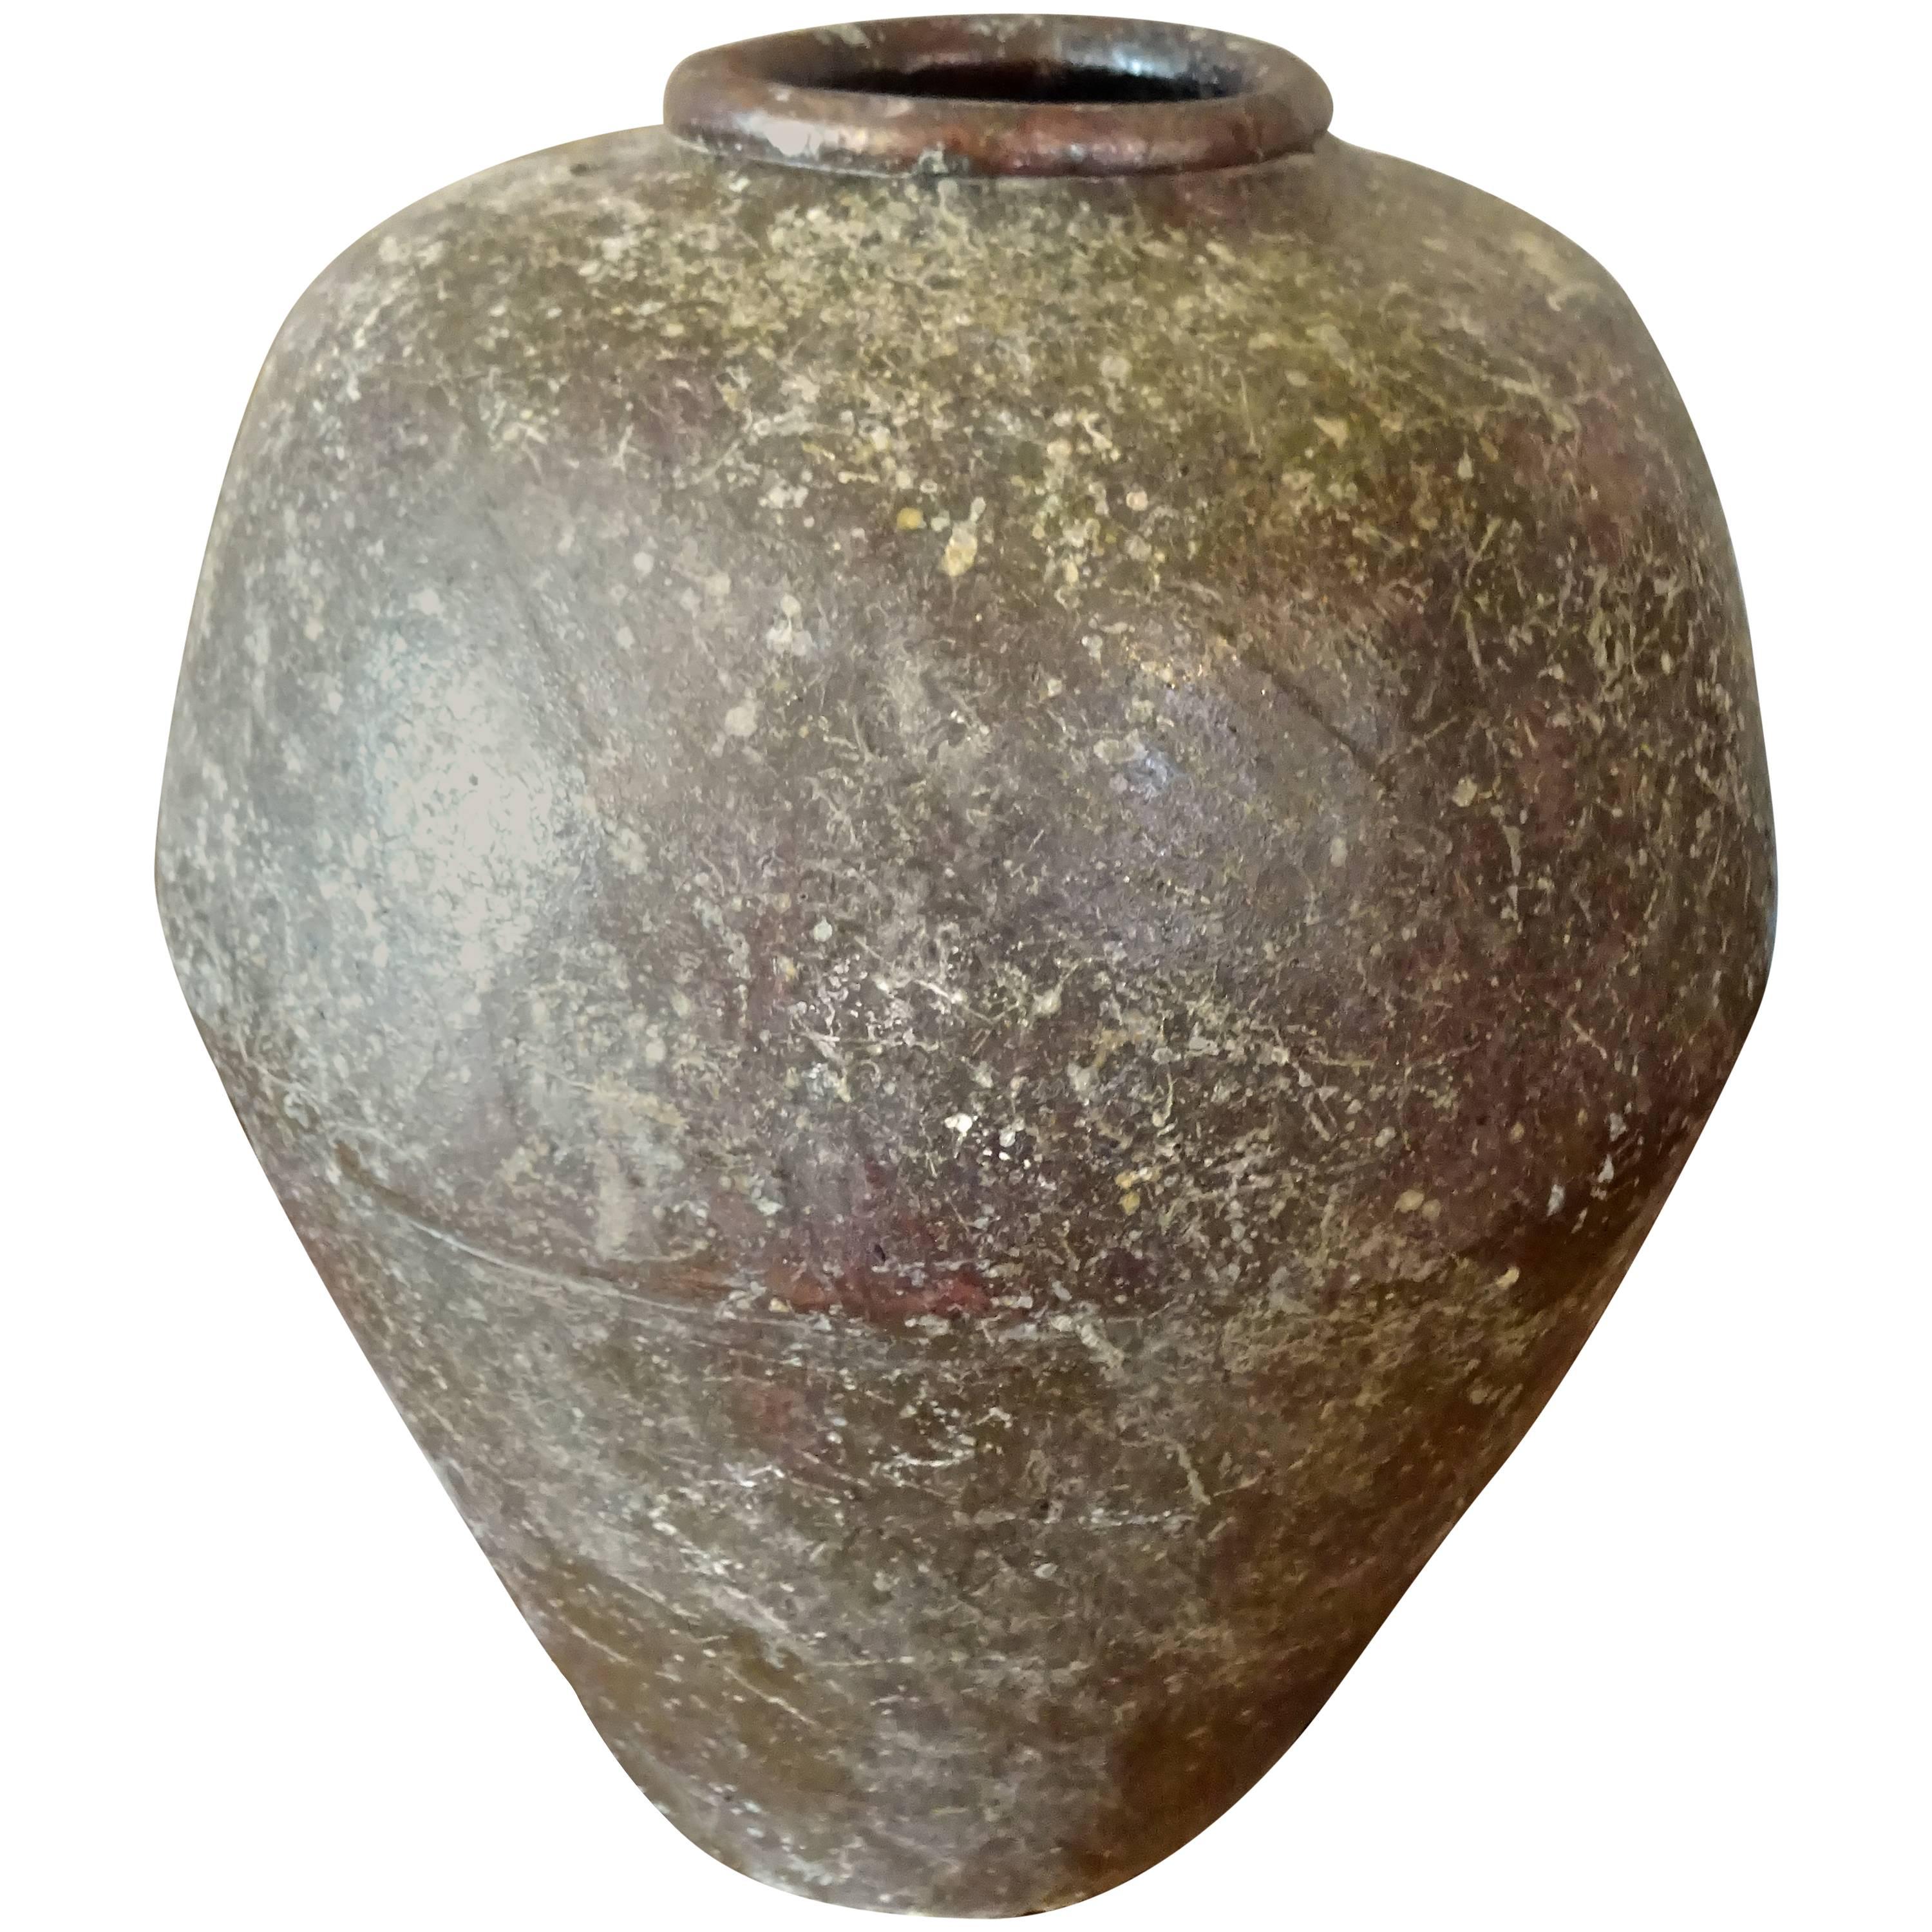 Rustic Chinese Water Jar For Sale